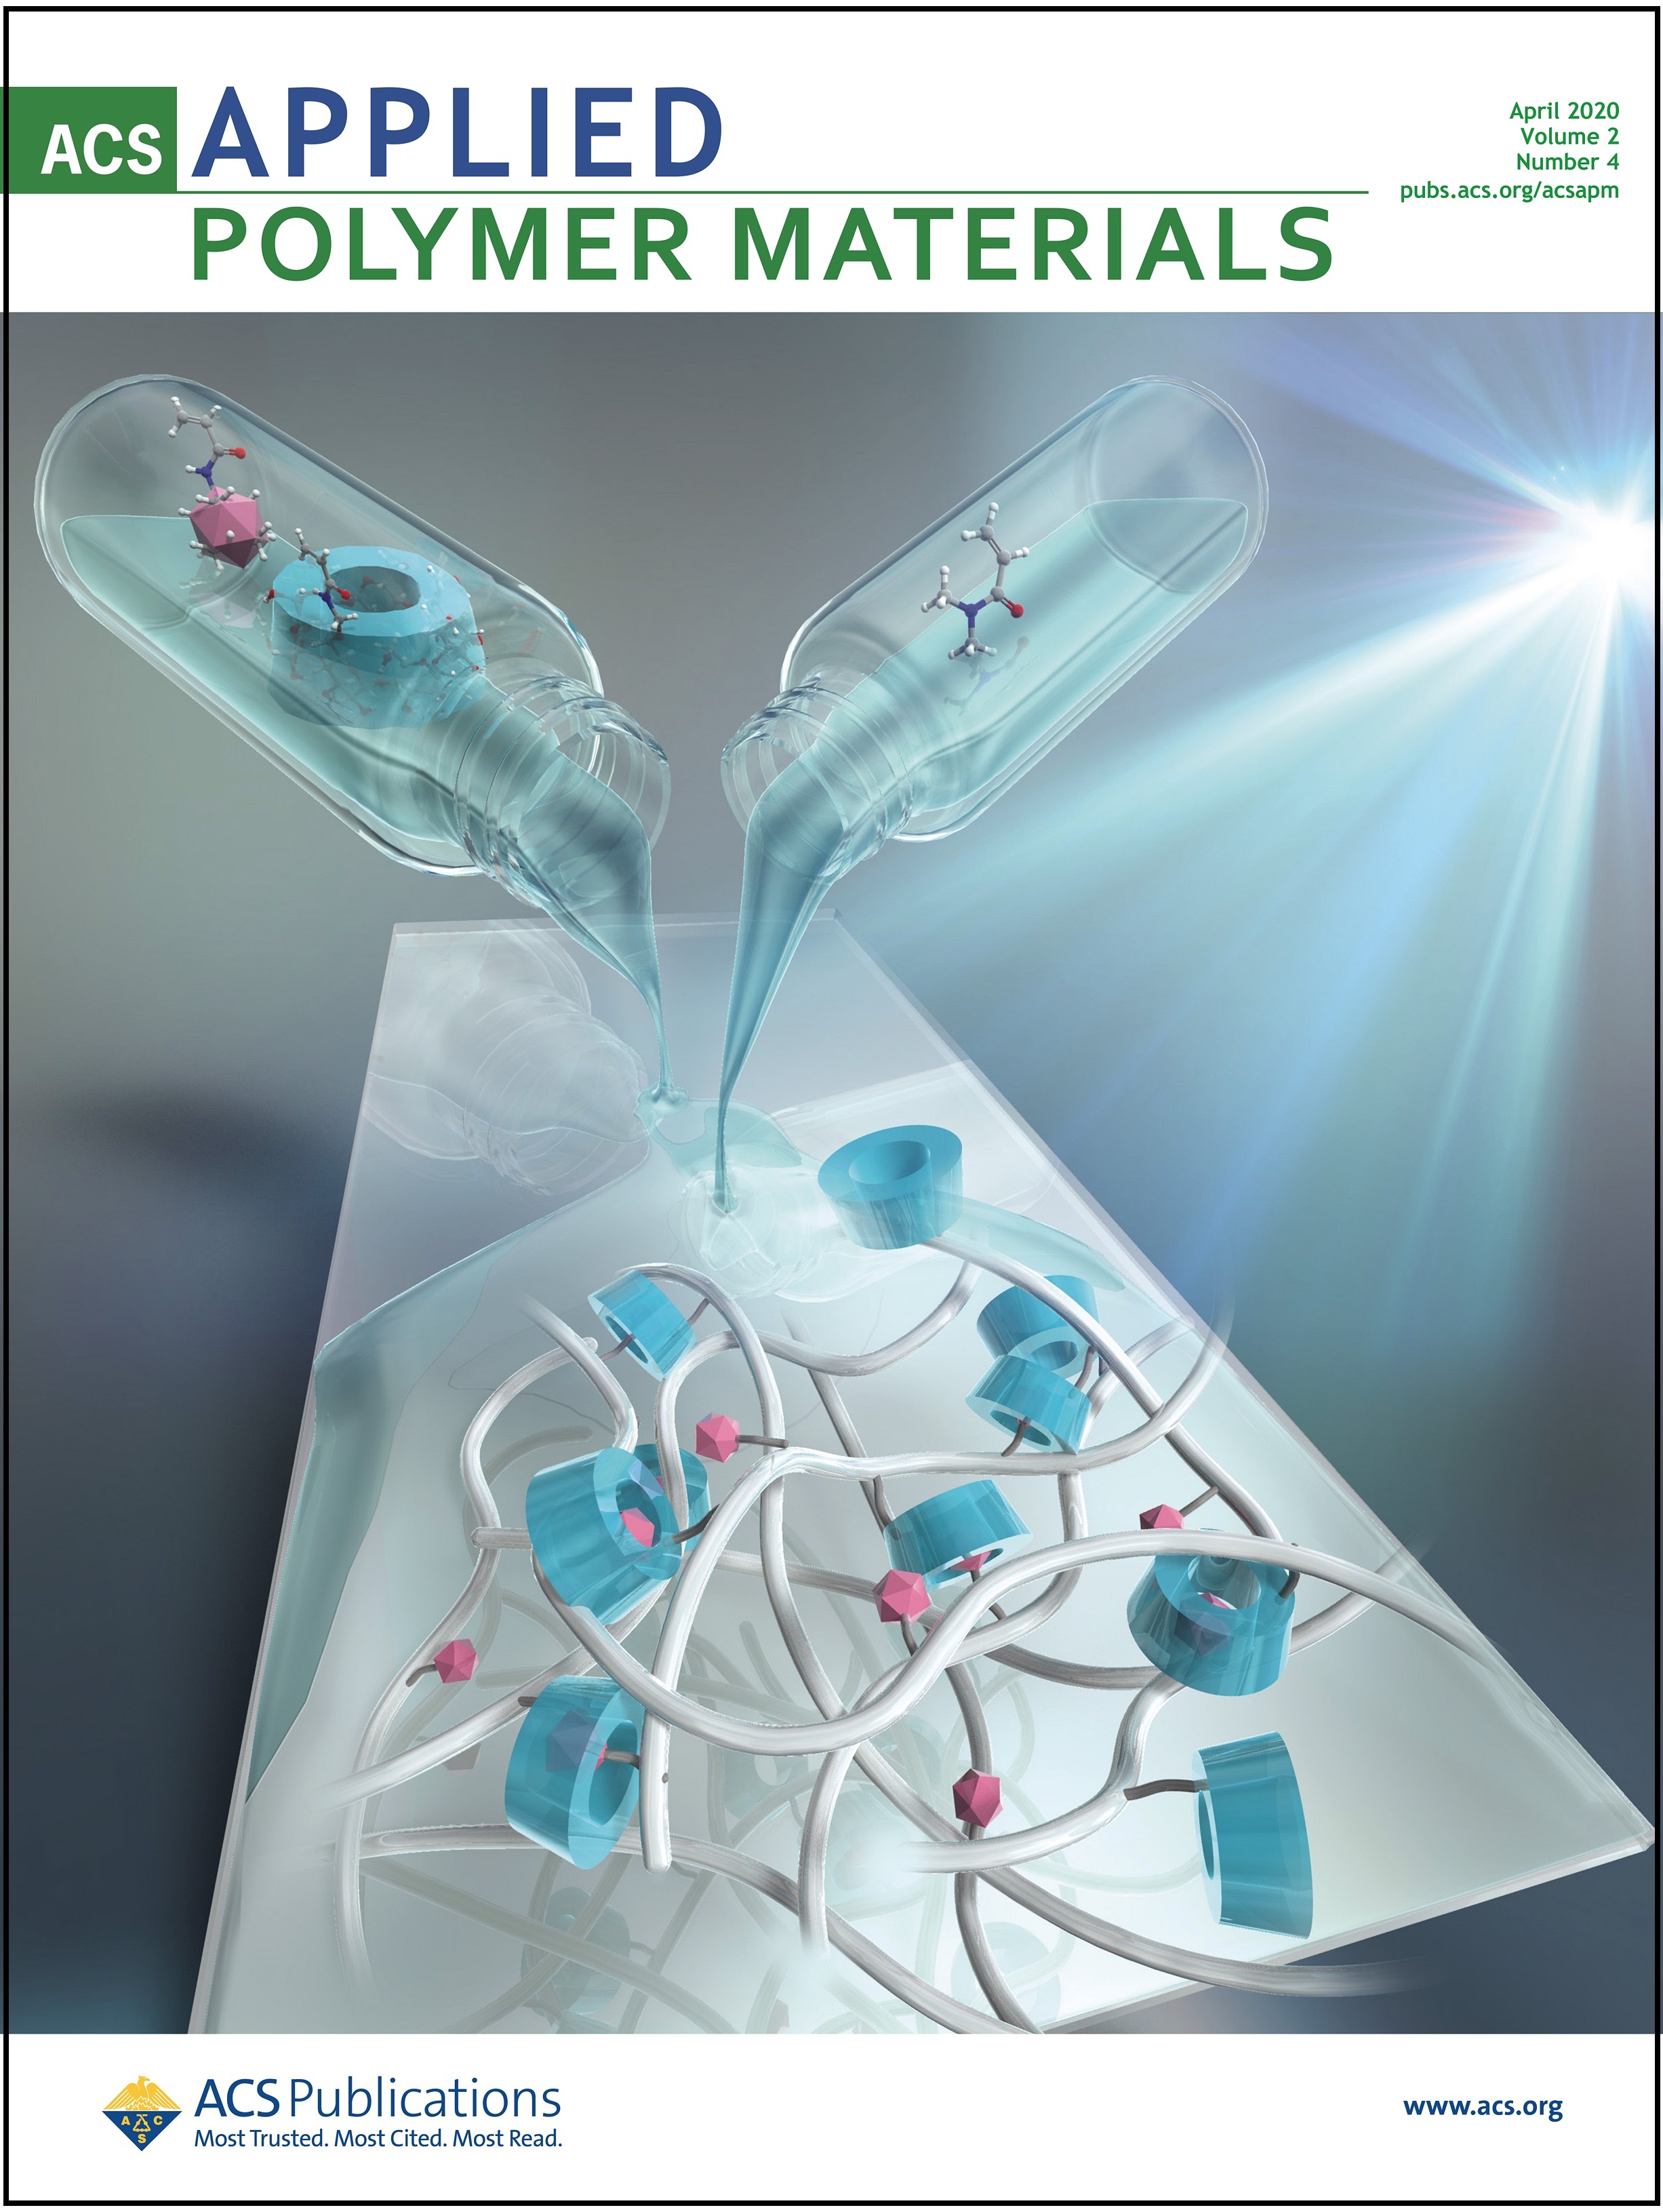 The cover of ACS Applied Polymer Materials